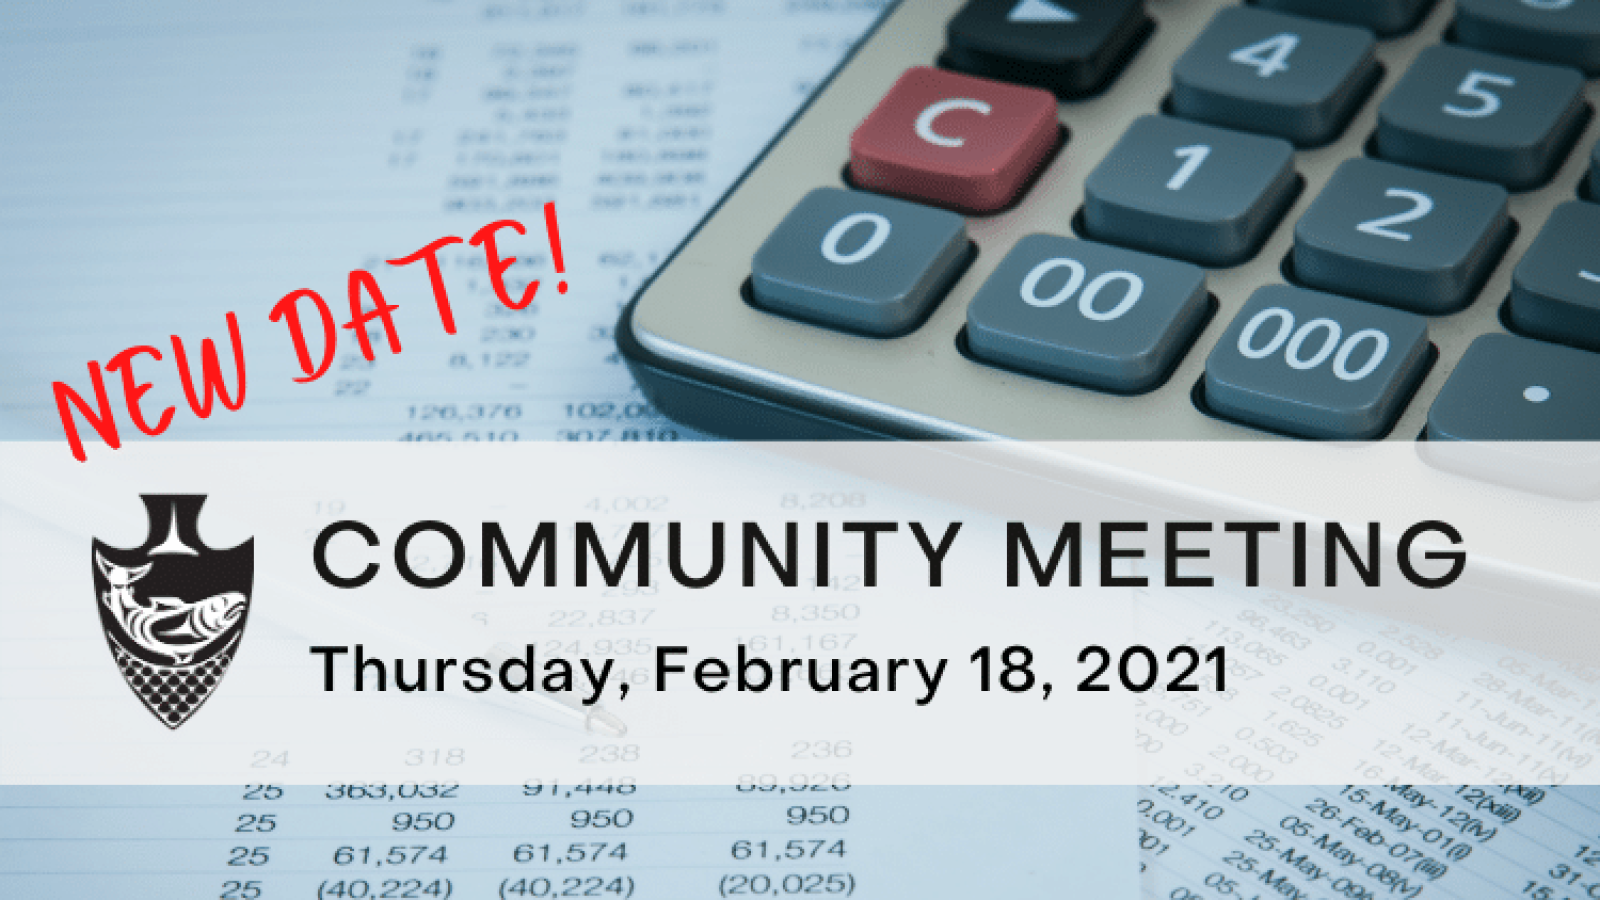 New date for community meeting is February 18